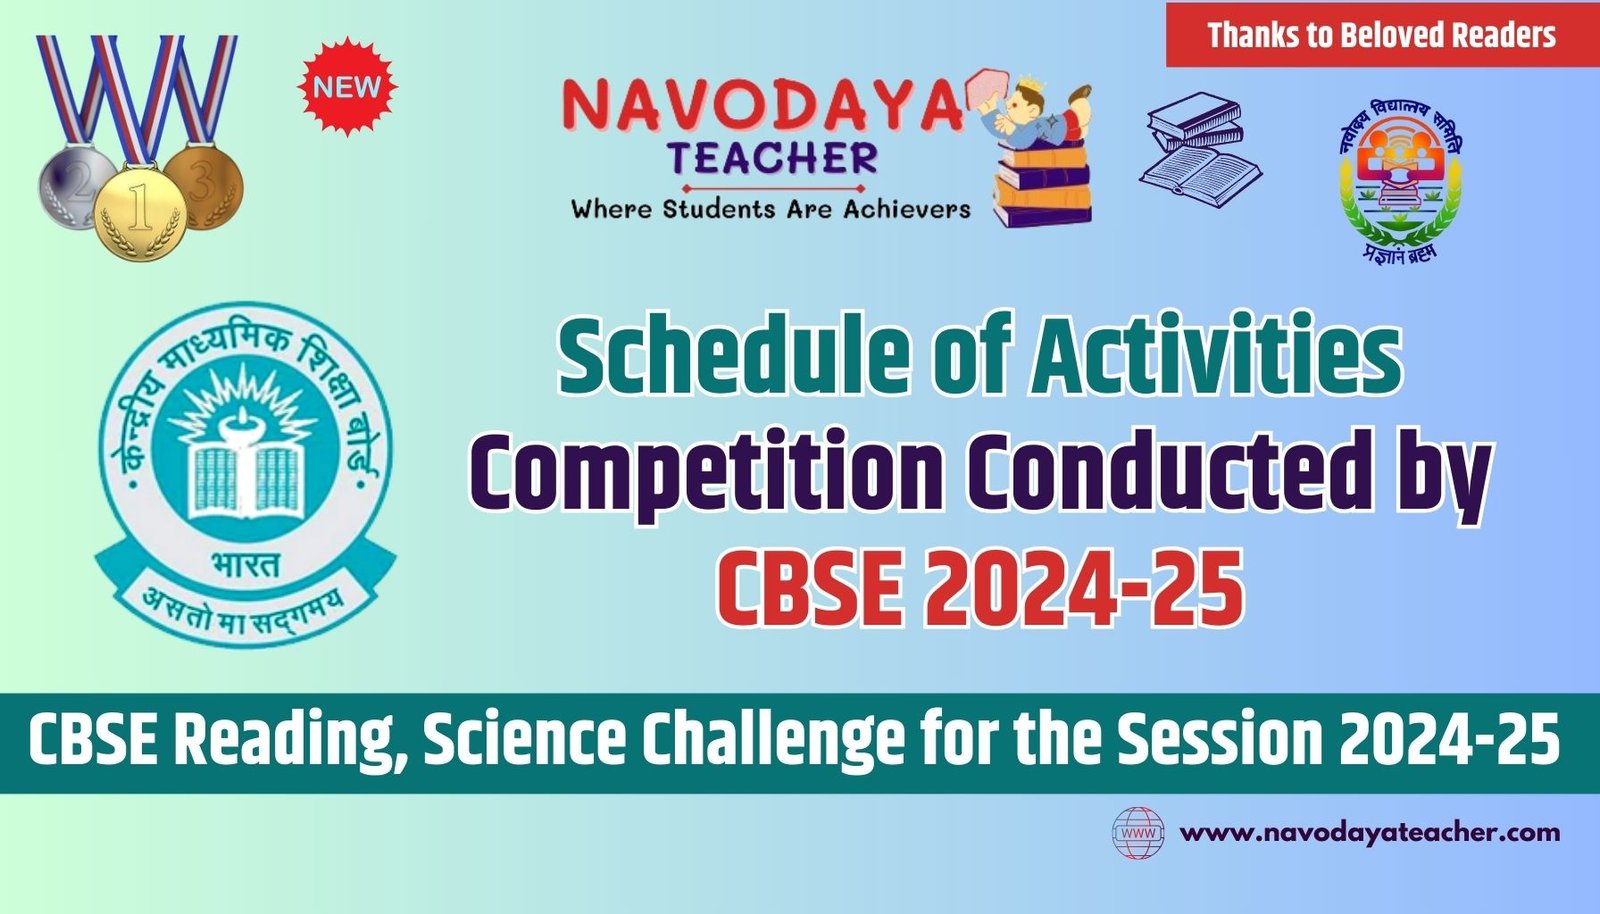 Schedule of Activities Competition Conducted by CBSE 2024-25